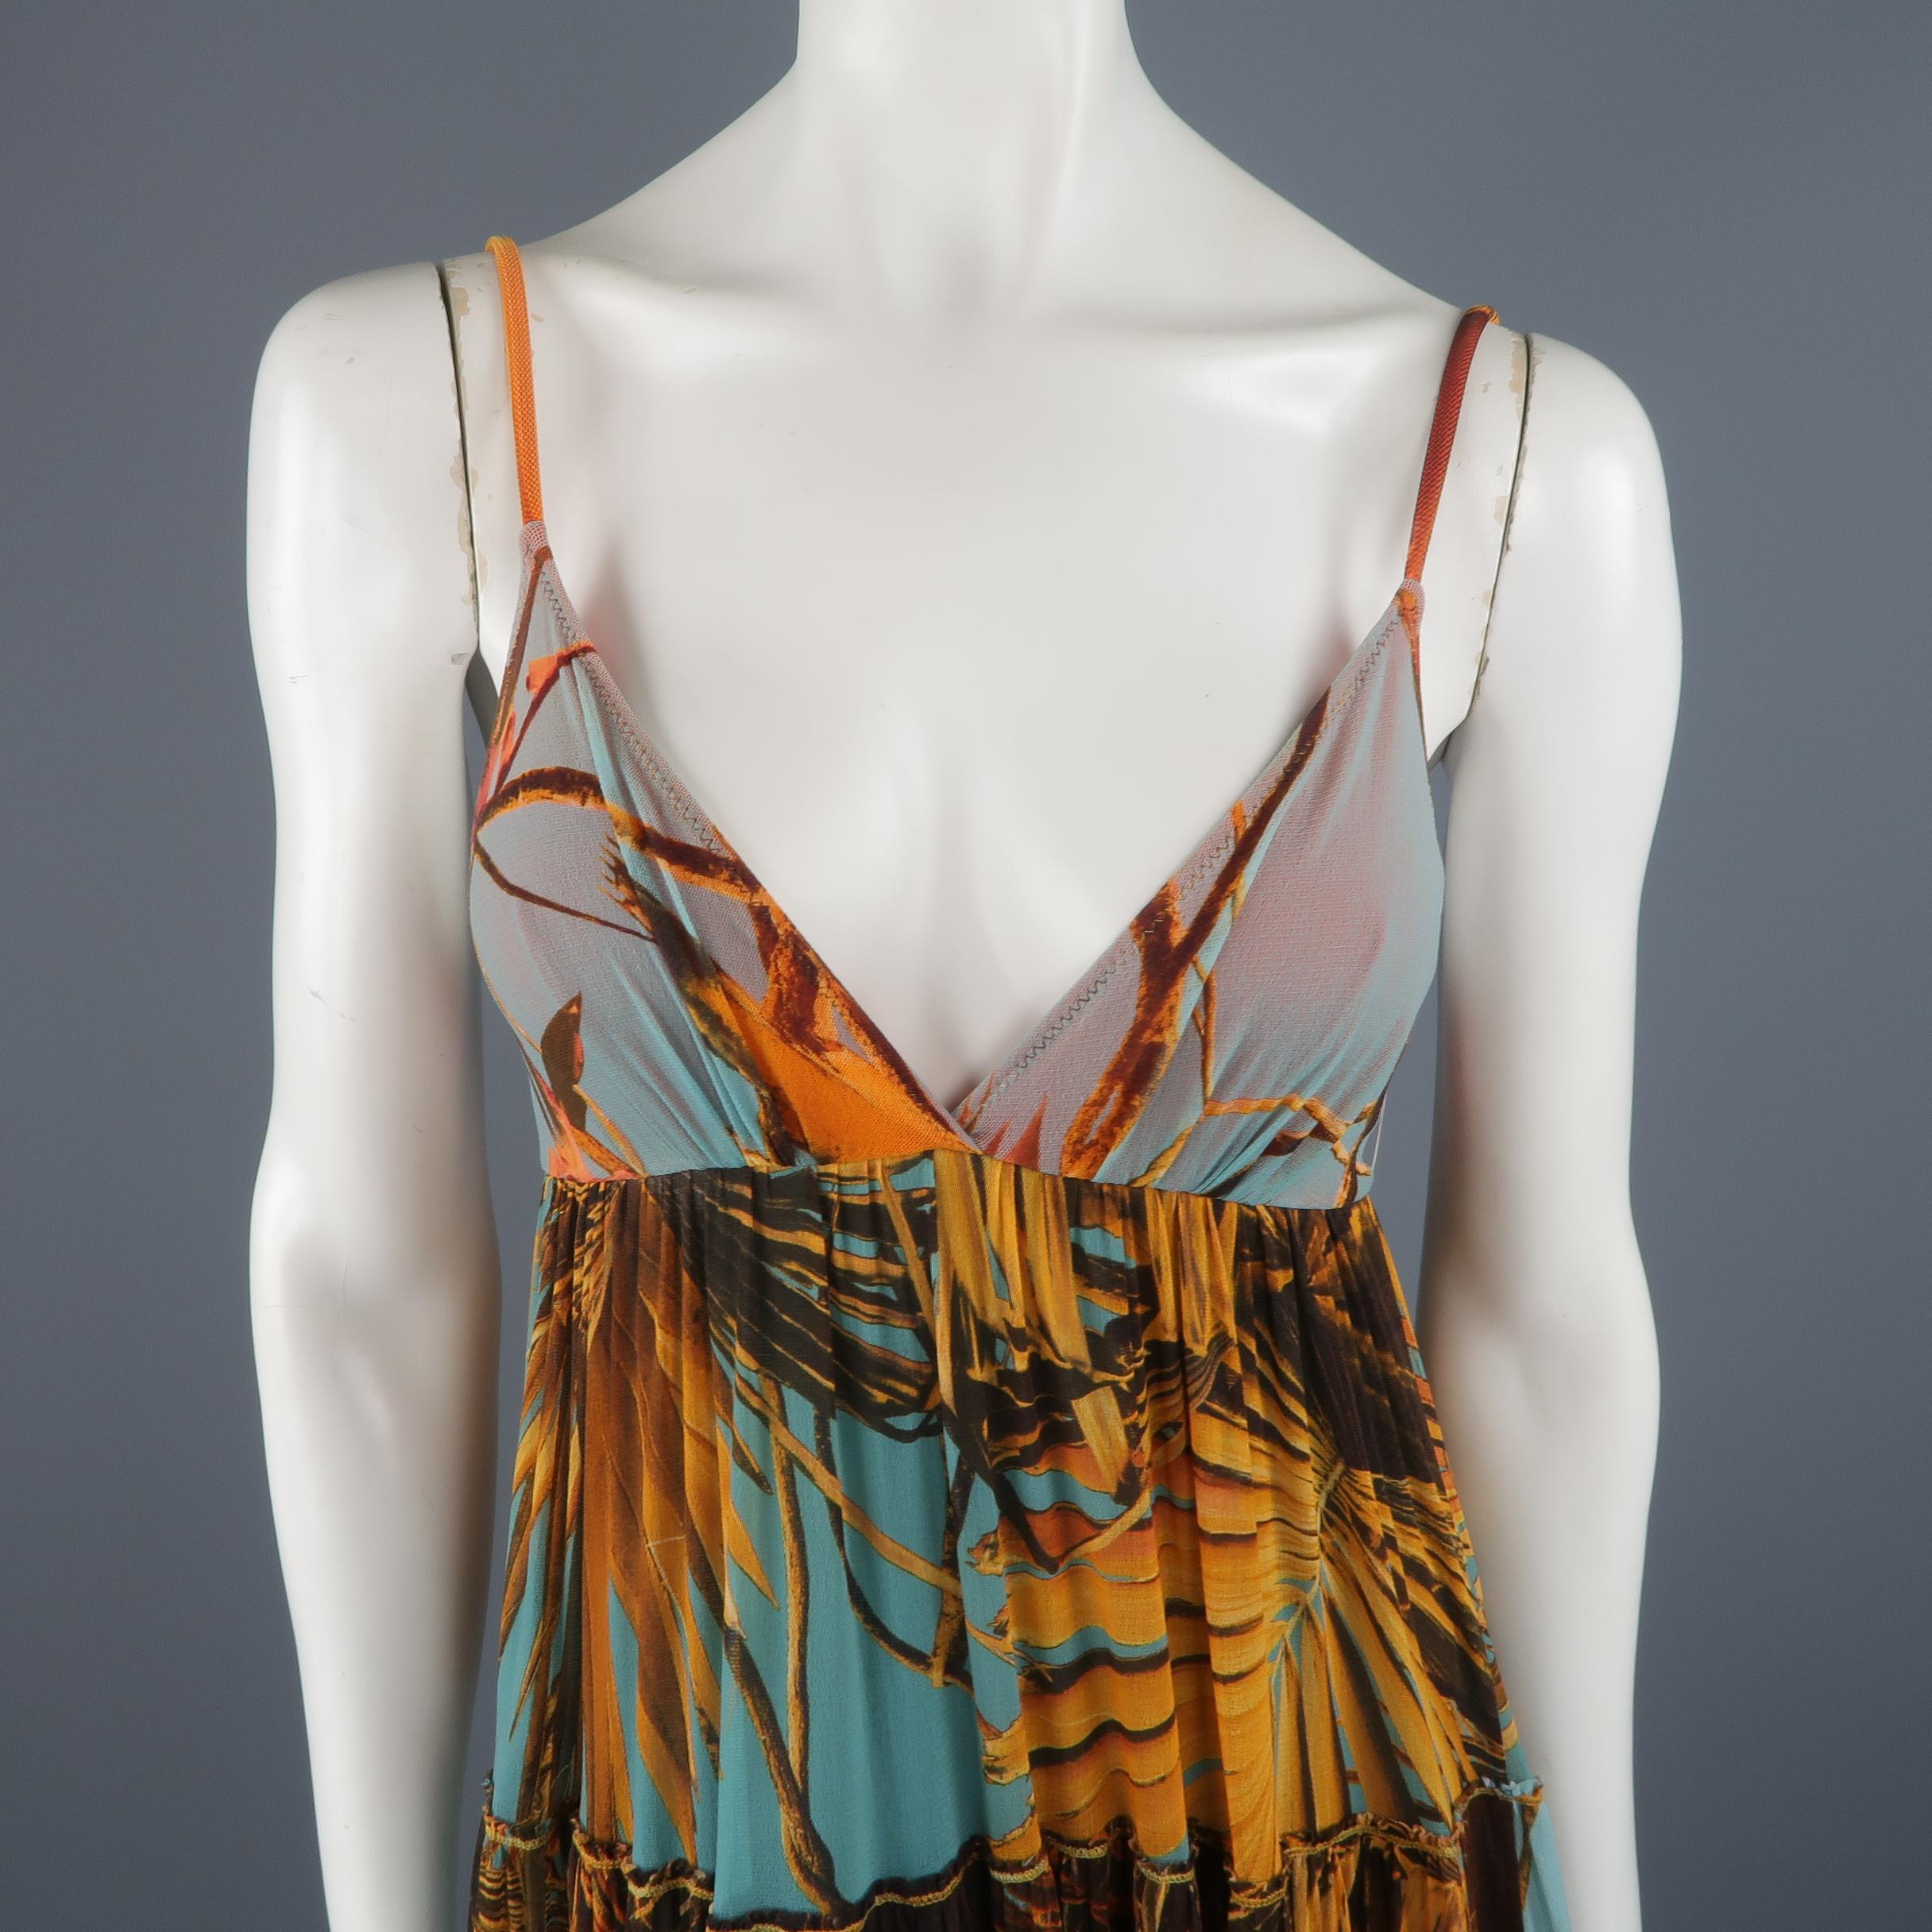 JEAN PAUL GAULTIER maxi dress comes in blue and orange palm print micro stretch mesh with a spaghetti strap bralette top and empire waist long, tiered, maxi skirt. Made in Italy.
 
Excellent Pre-Owned Condition.
Marked: S
 
Measurements:
 
Shoulder: